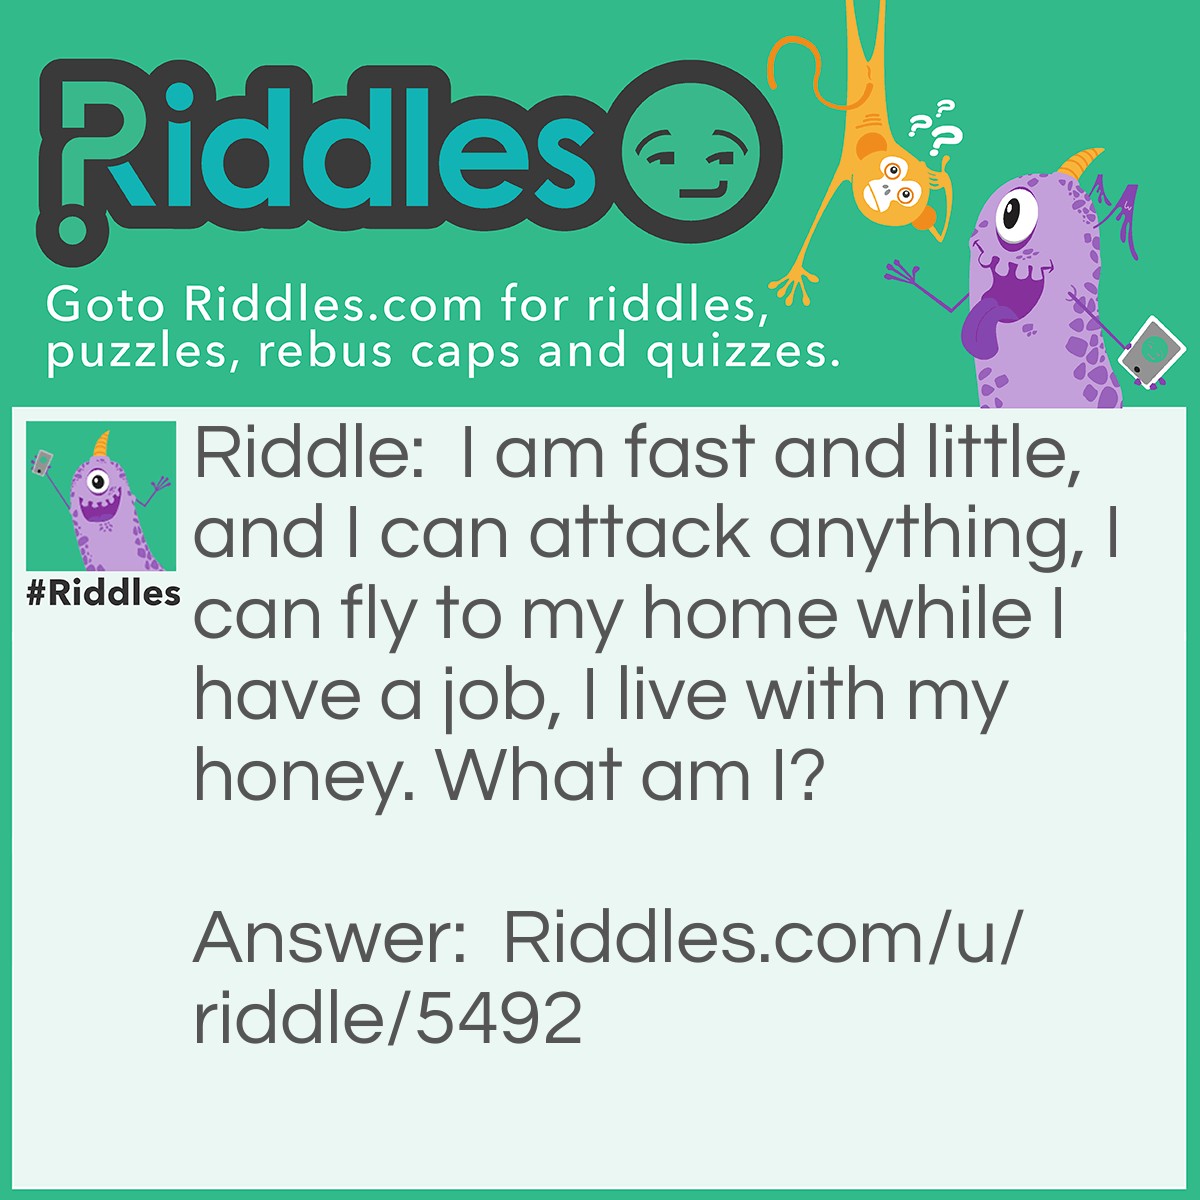 Riddle: I am fast and little, and I can attack anything, I can fly to my home while I have a job, I live with my honey. What am I? Answer: A bee!